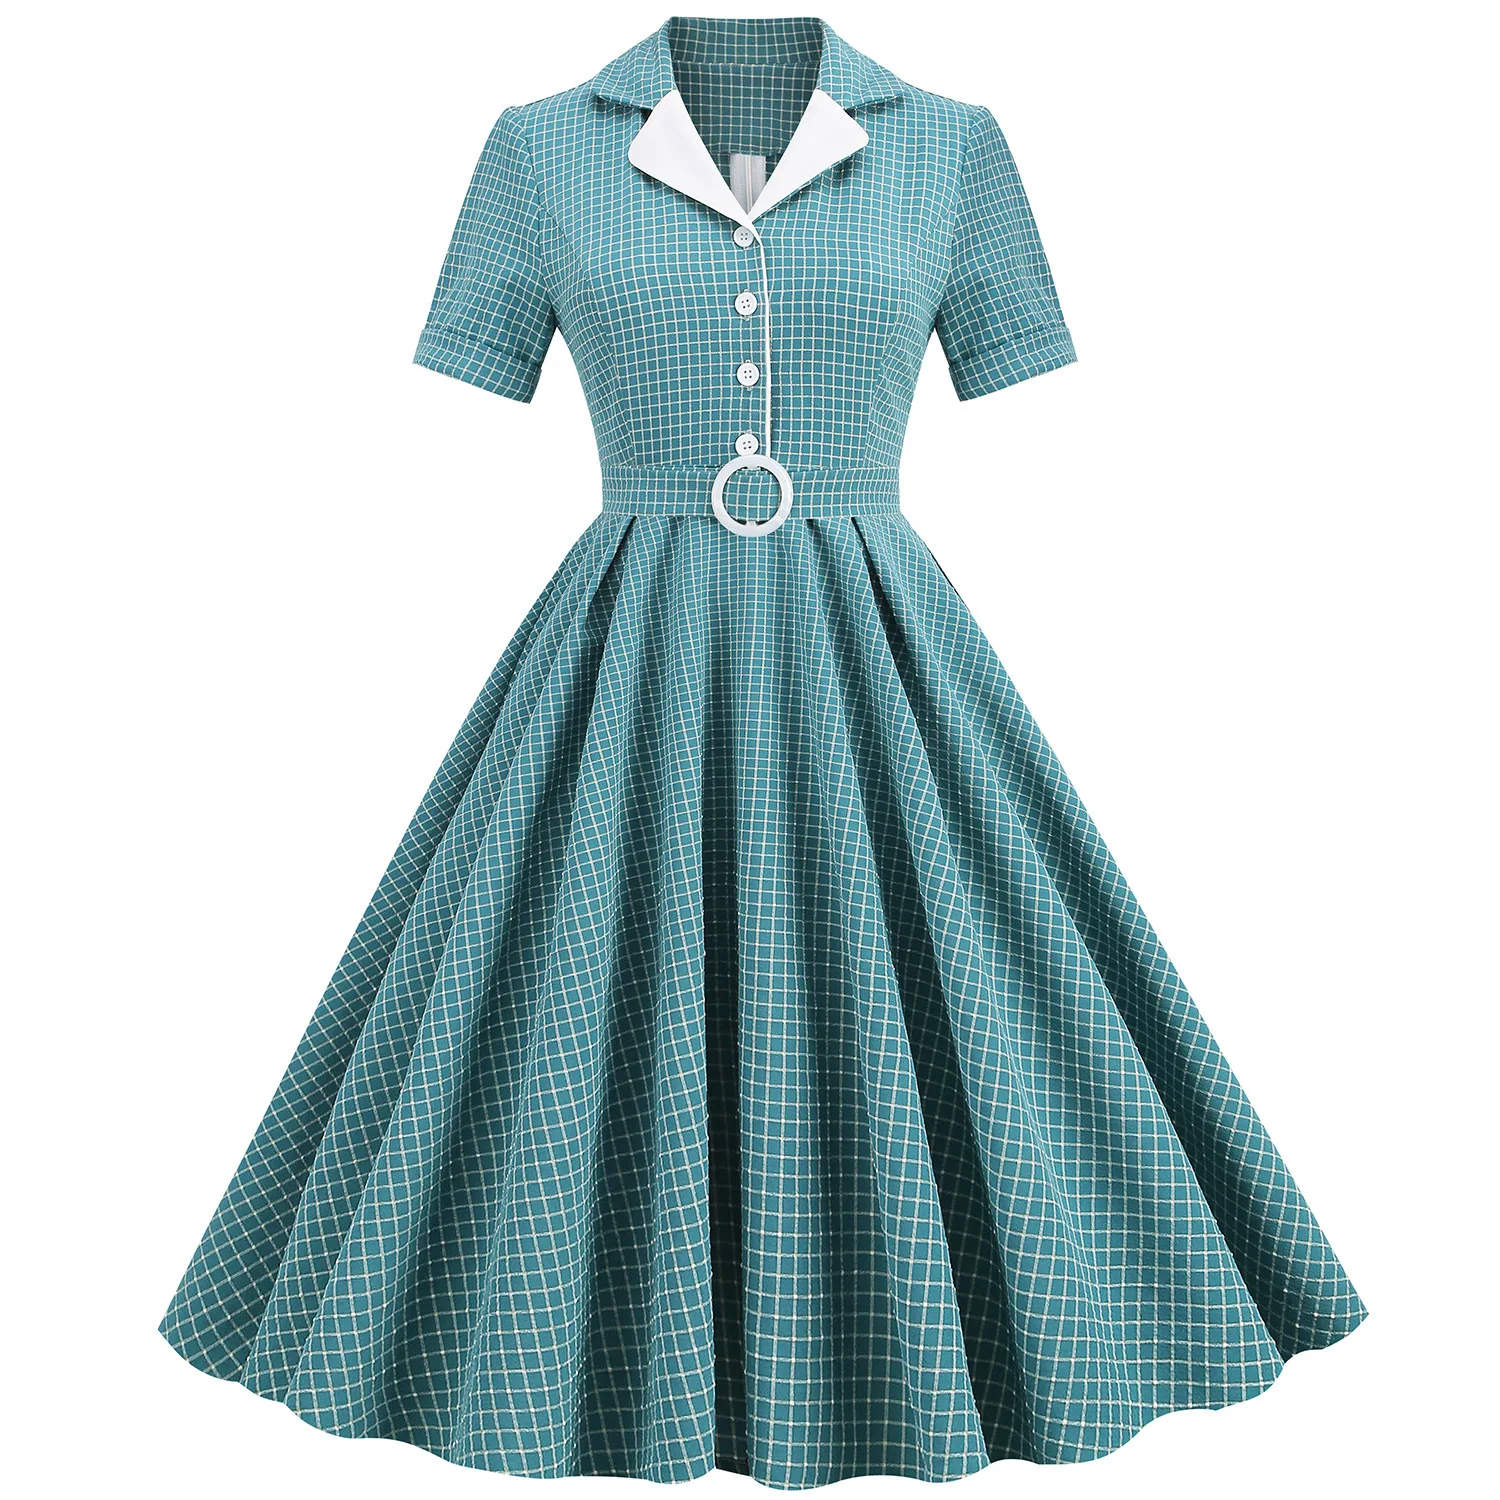 Vintage Women's Dress，Summer Style Suit Collar Stretch Fitting Dress.